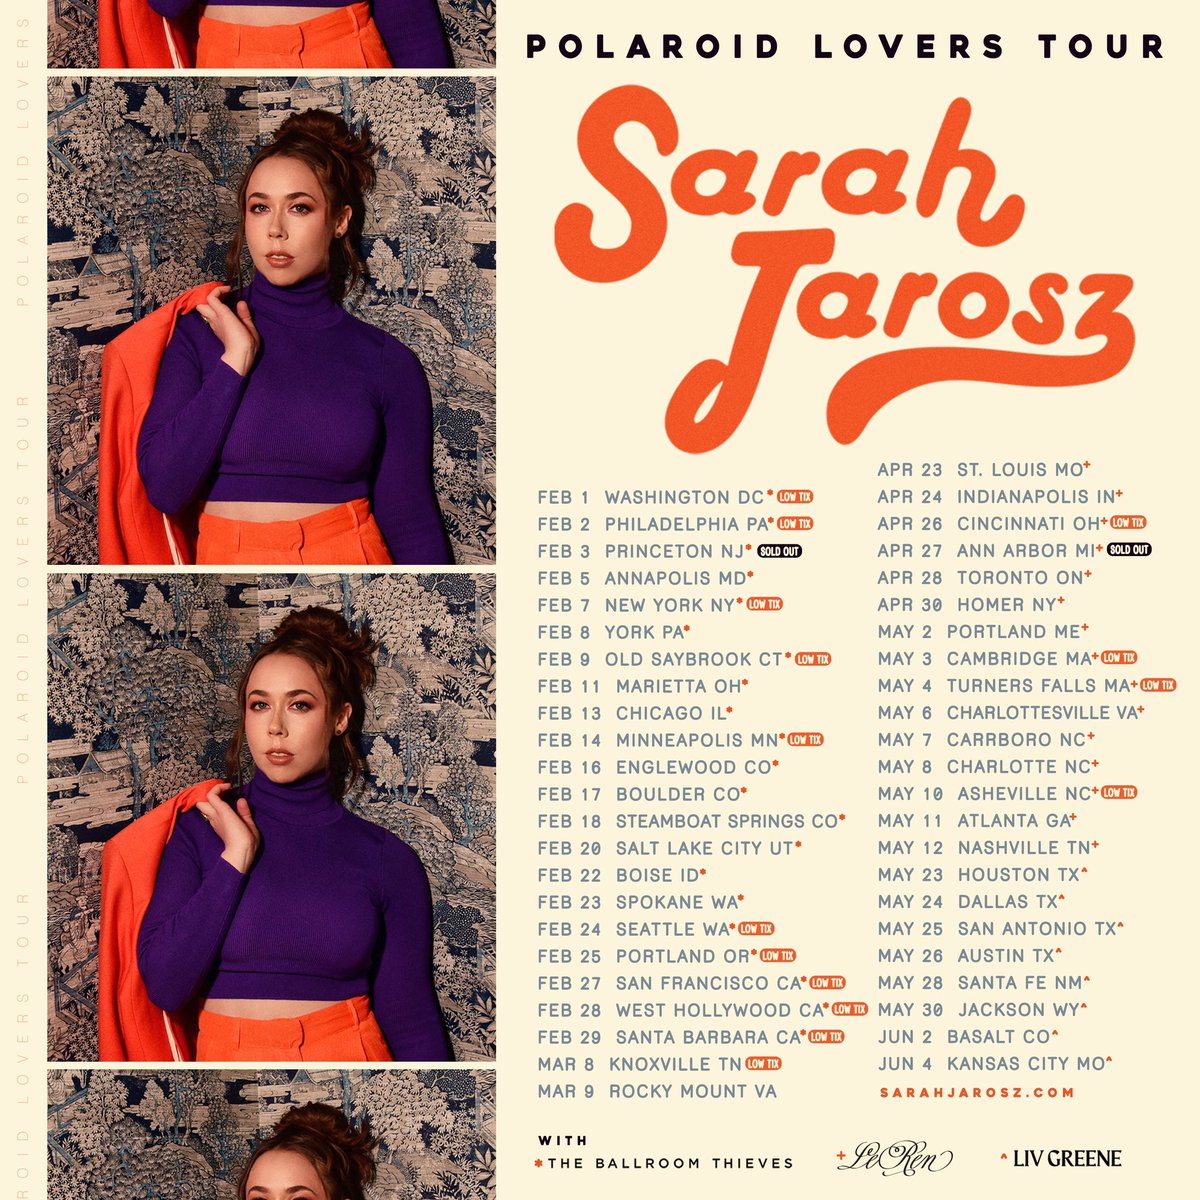 I’m excited to announce that these lovely folks will be kicking off the shows on the Polaroid Lovers Tour! 🧡 @BallroomThieves 🧡 Le Ren 🧡 @liv_greene_ Thrilled to have them along. Tickets are going fast! Head to my website to get yours.  🎟 sarahjarosz.com